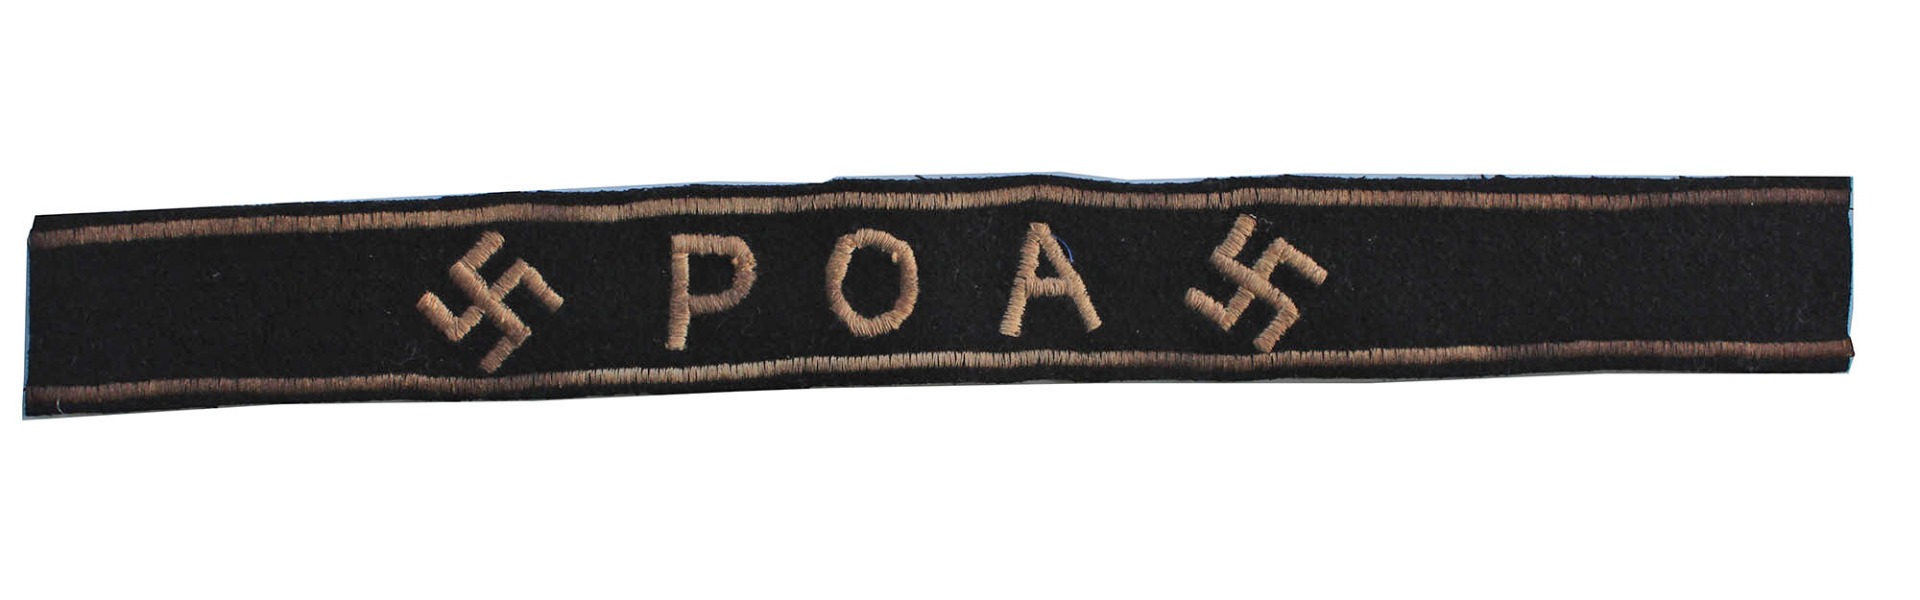 WWII POA RUSSIAN NATIONAL ARMY VOLUNTEER ARMBAND CUFF TITLE 